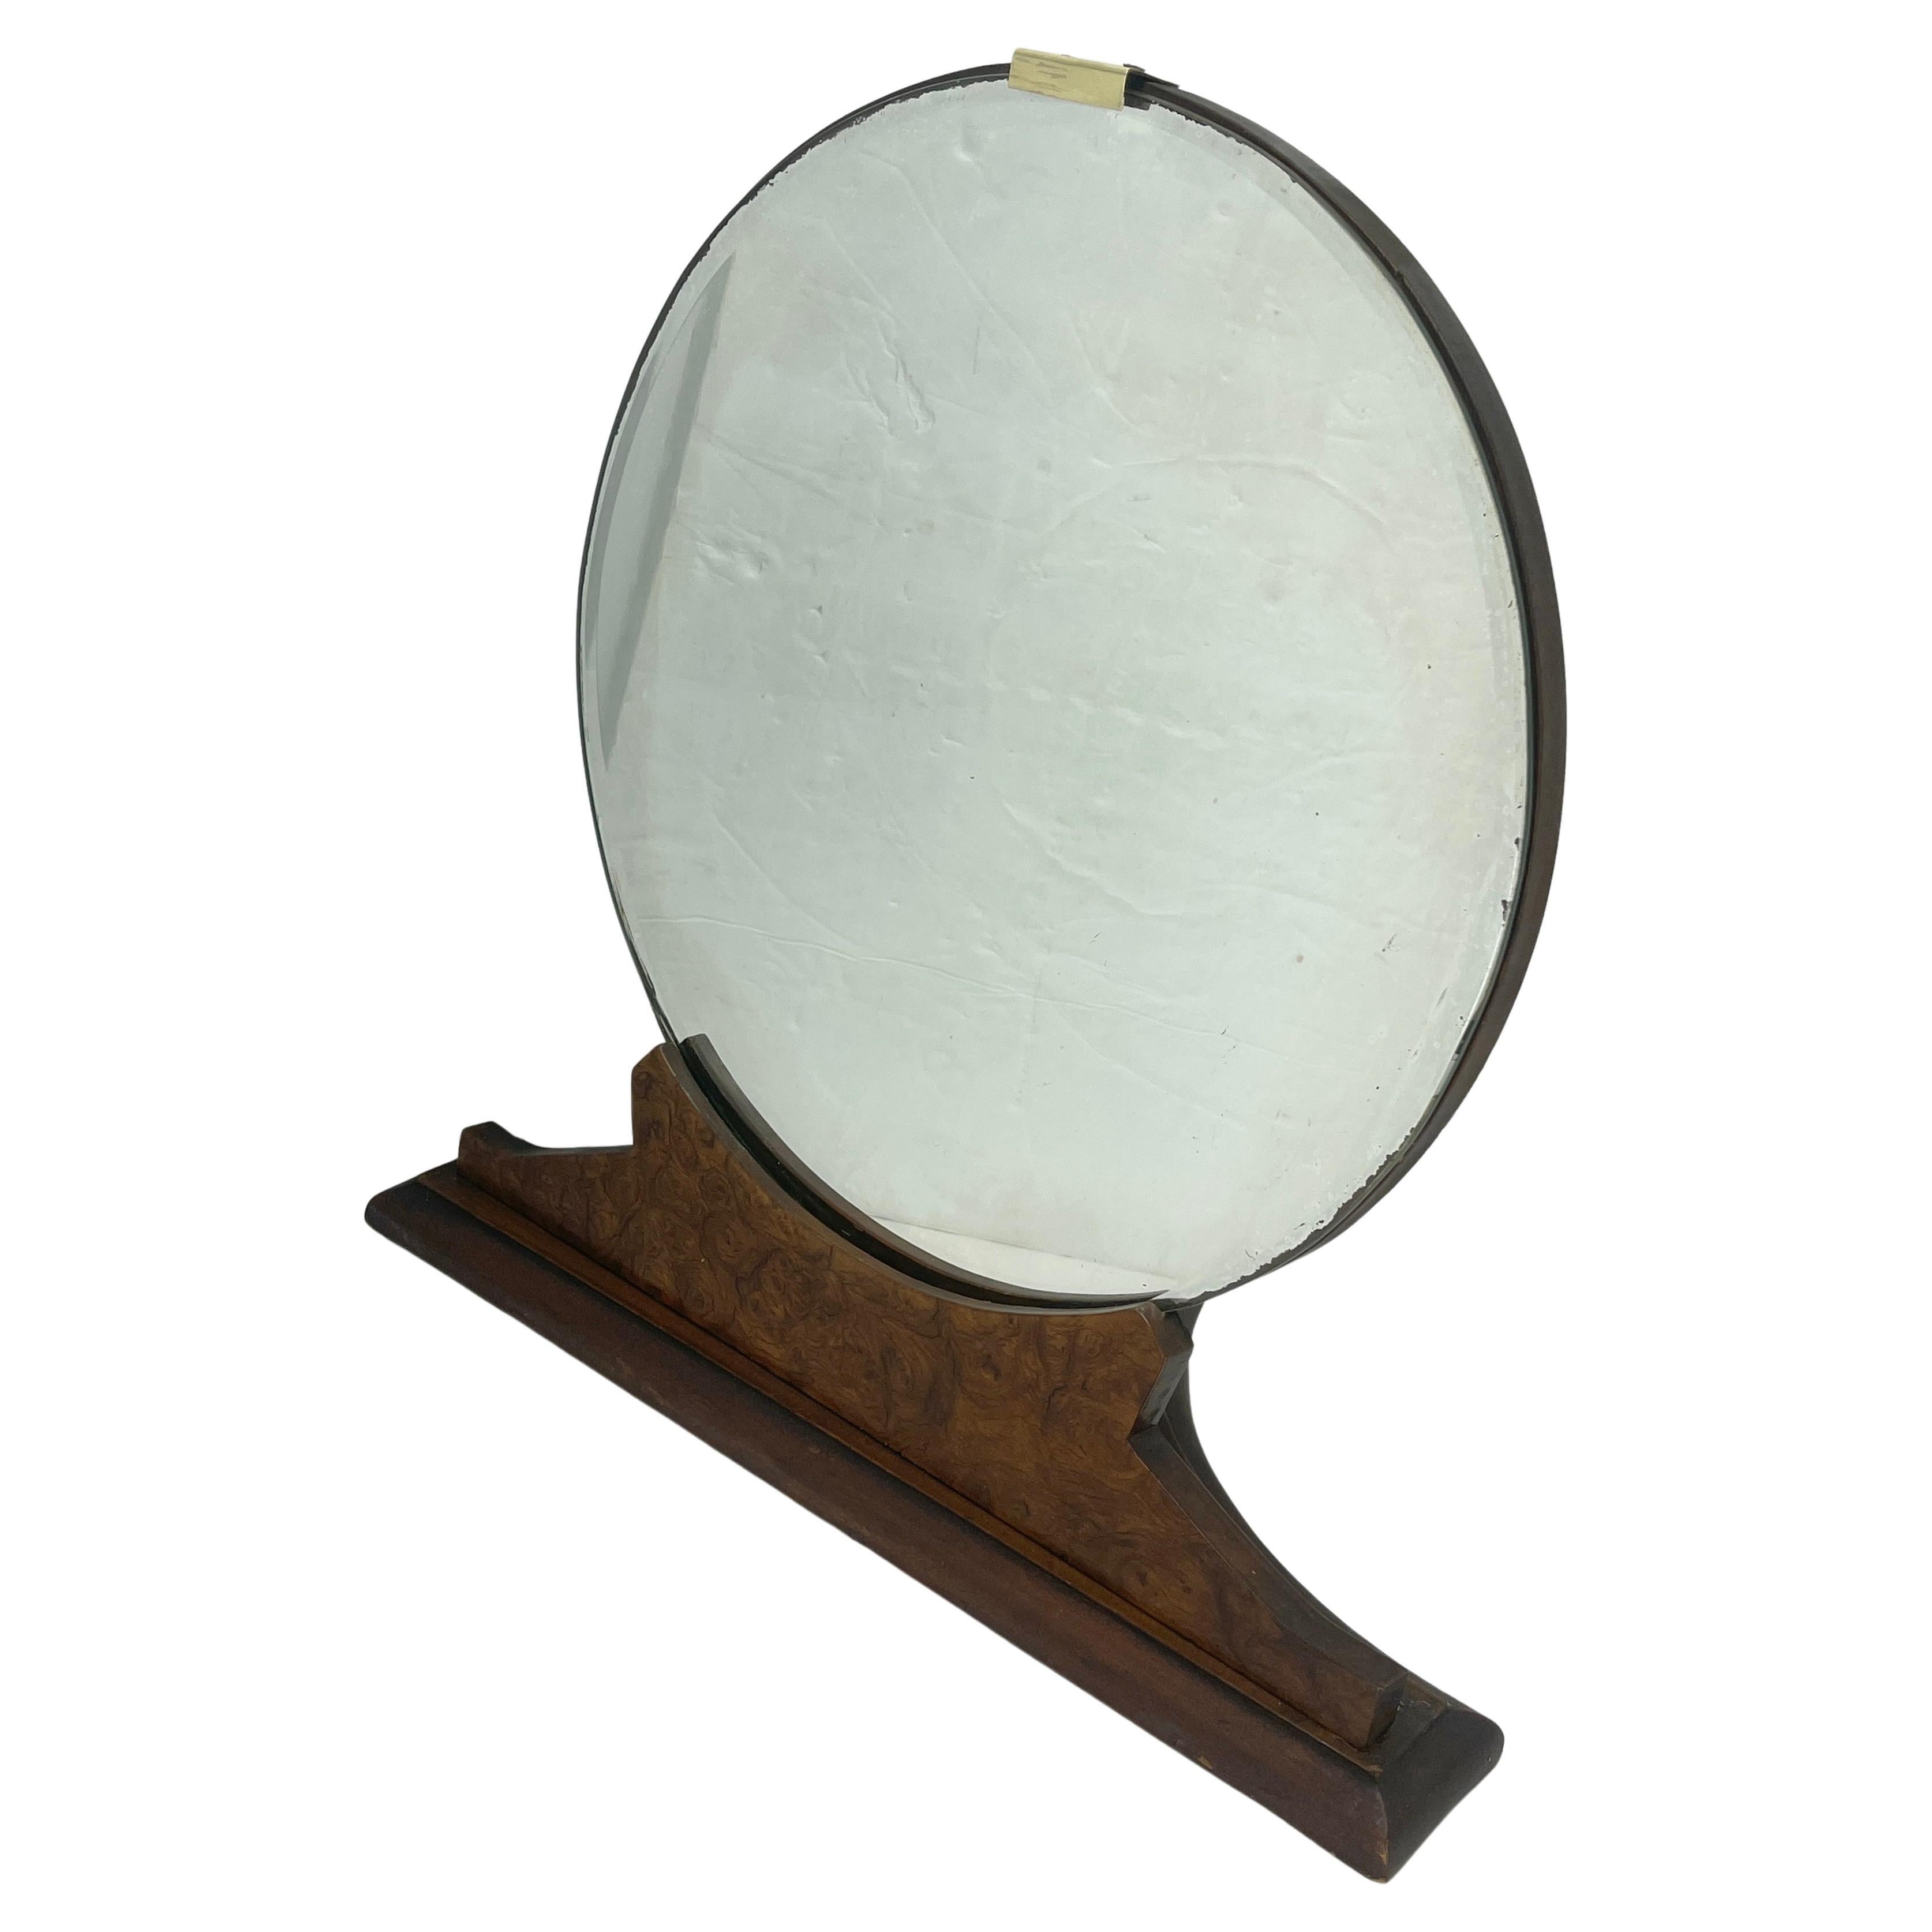 American Burlwood vanity table mirror with round mirror glass and brass hardware, Circa 1930's.